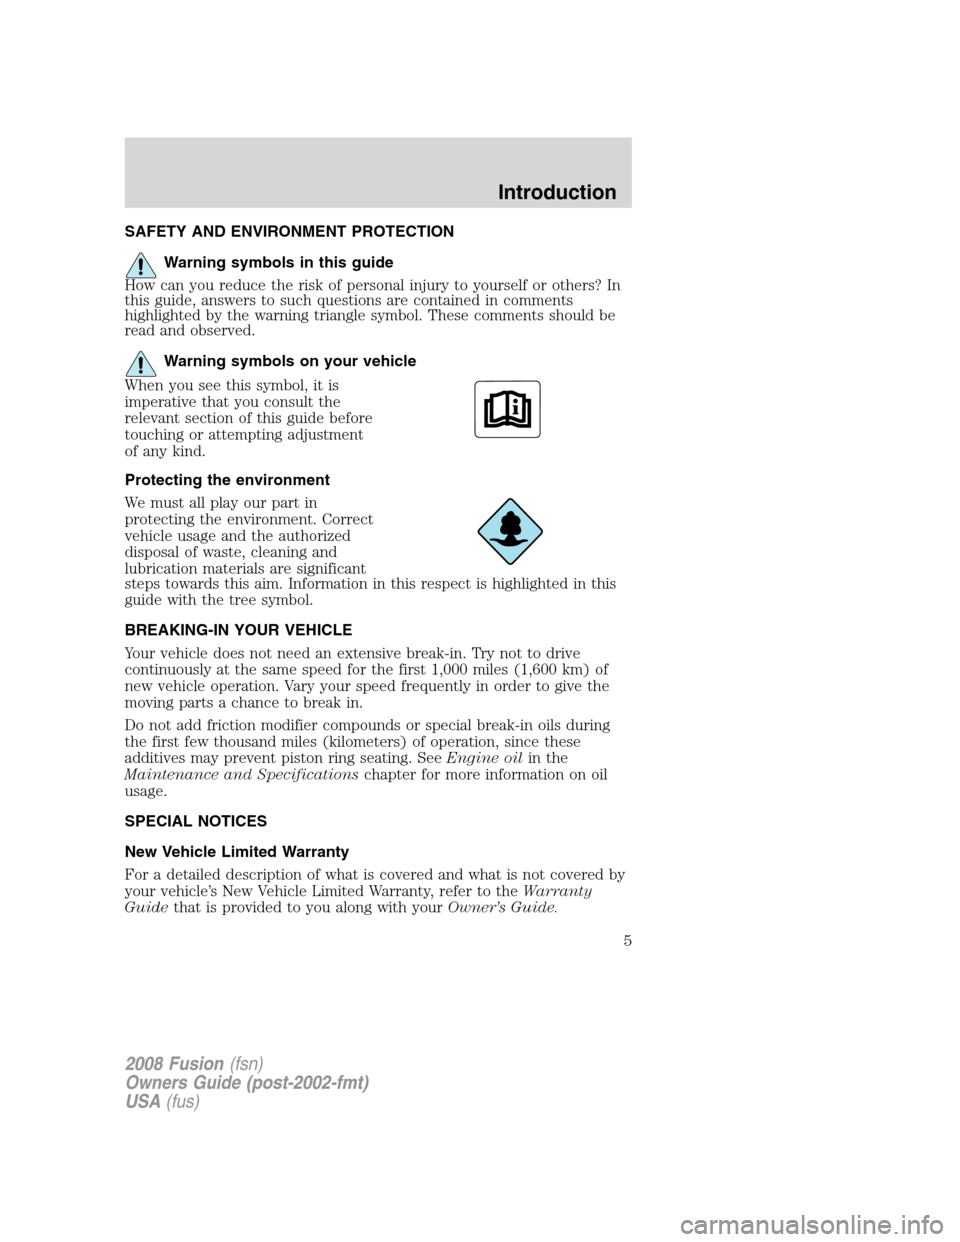 FORD FUSION (AMERICAS) 2008 1.G Owners Manual SAFETY AND ENVIRONMENT PROTECTION
Warning symbols in this guide
How can you reduce the risk of personal injury to yourself or others? In
this guide, answers to such questions are contained in comments